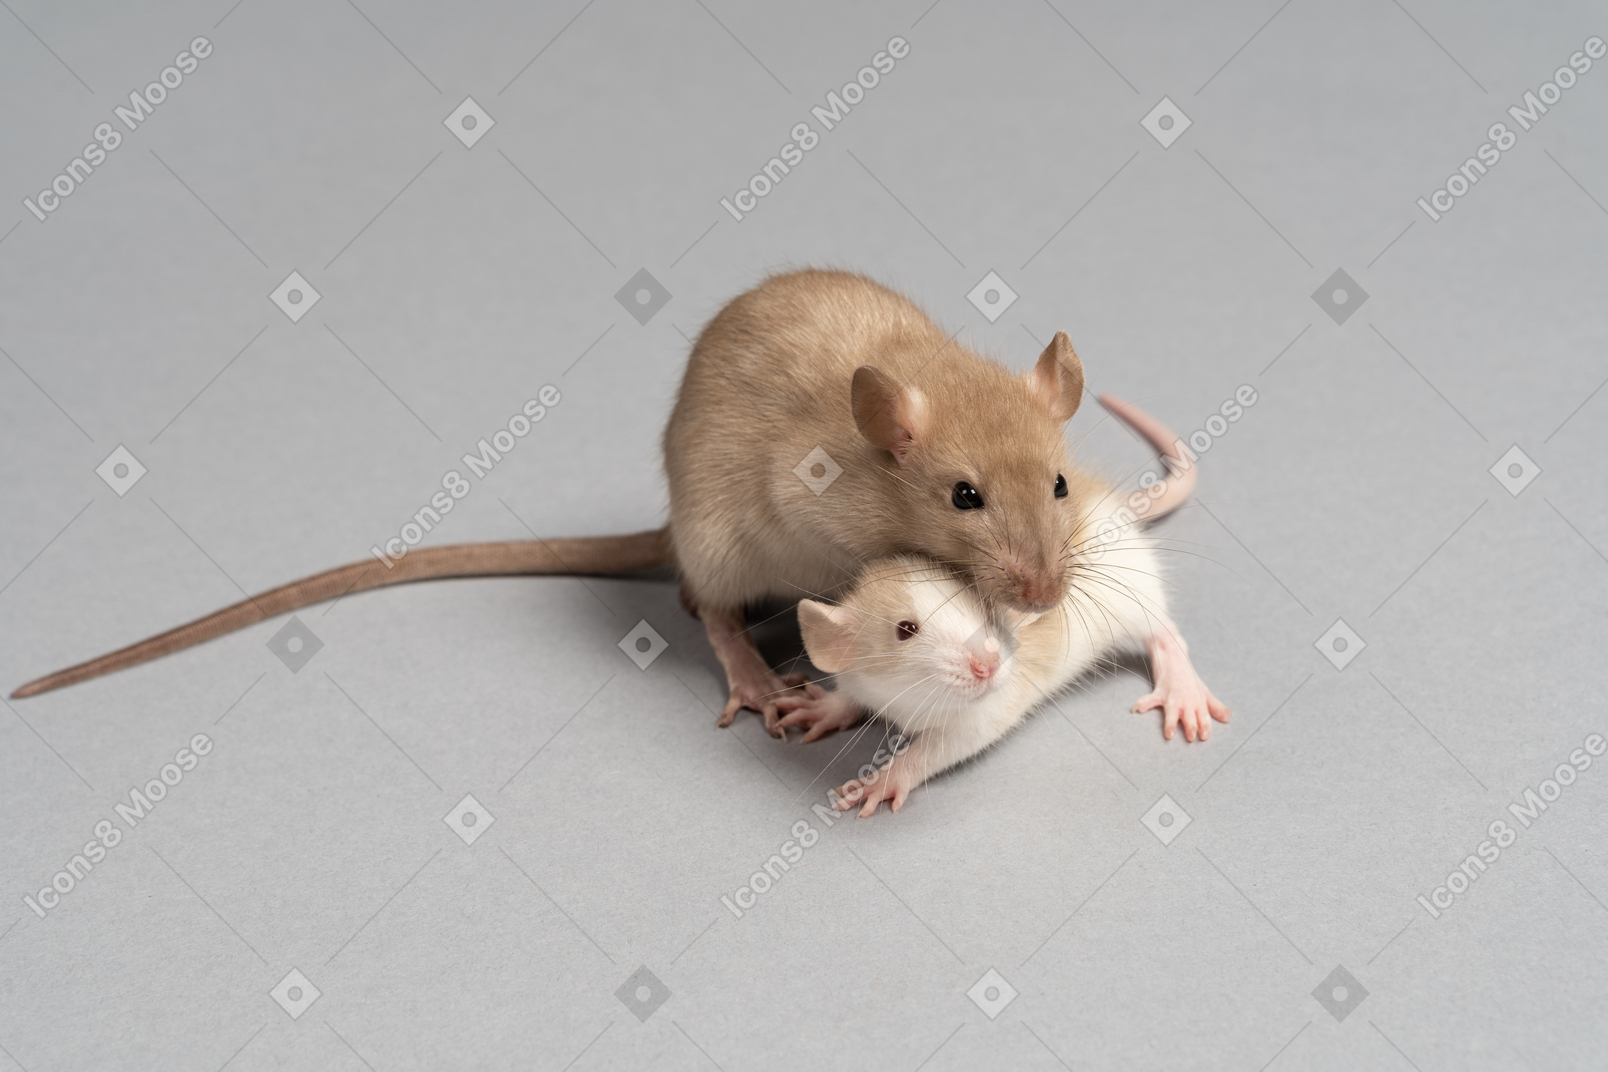 White and brown mice on grey background